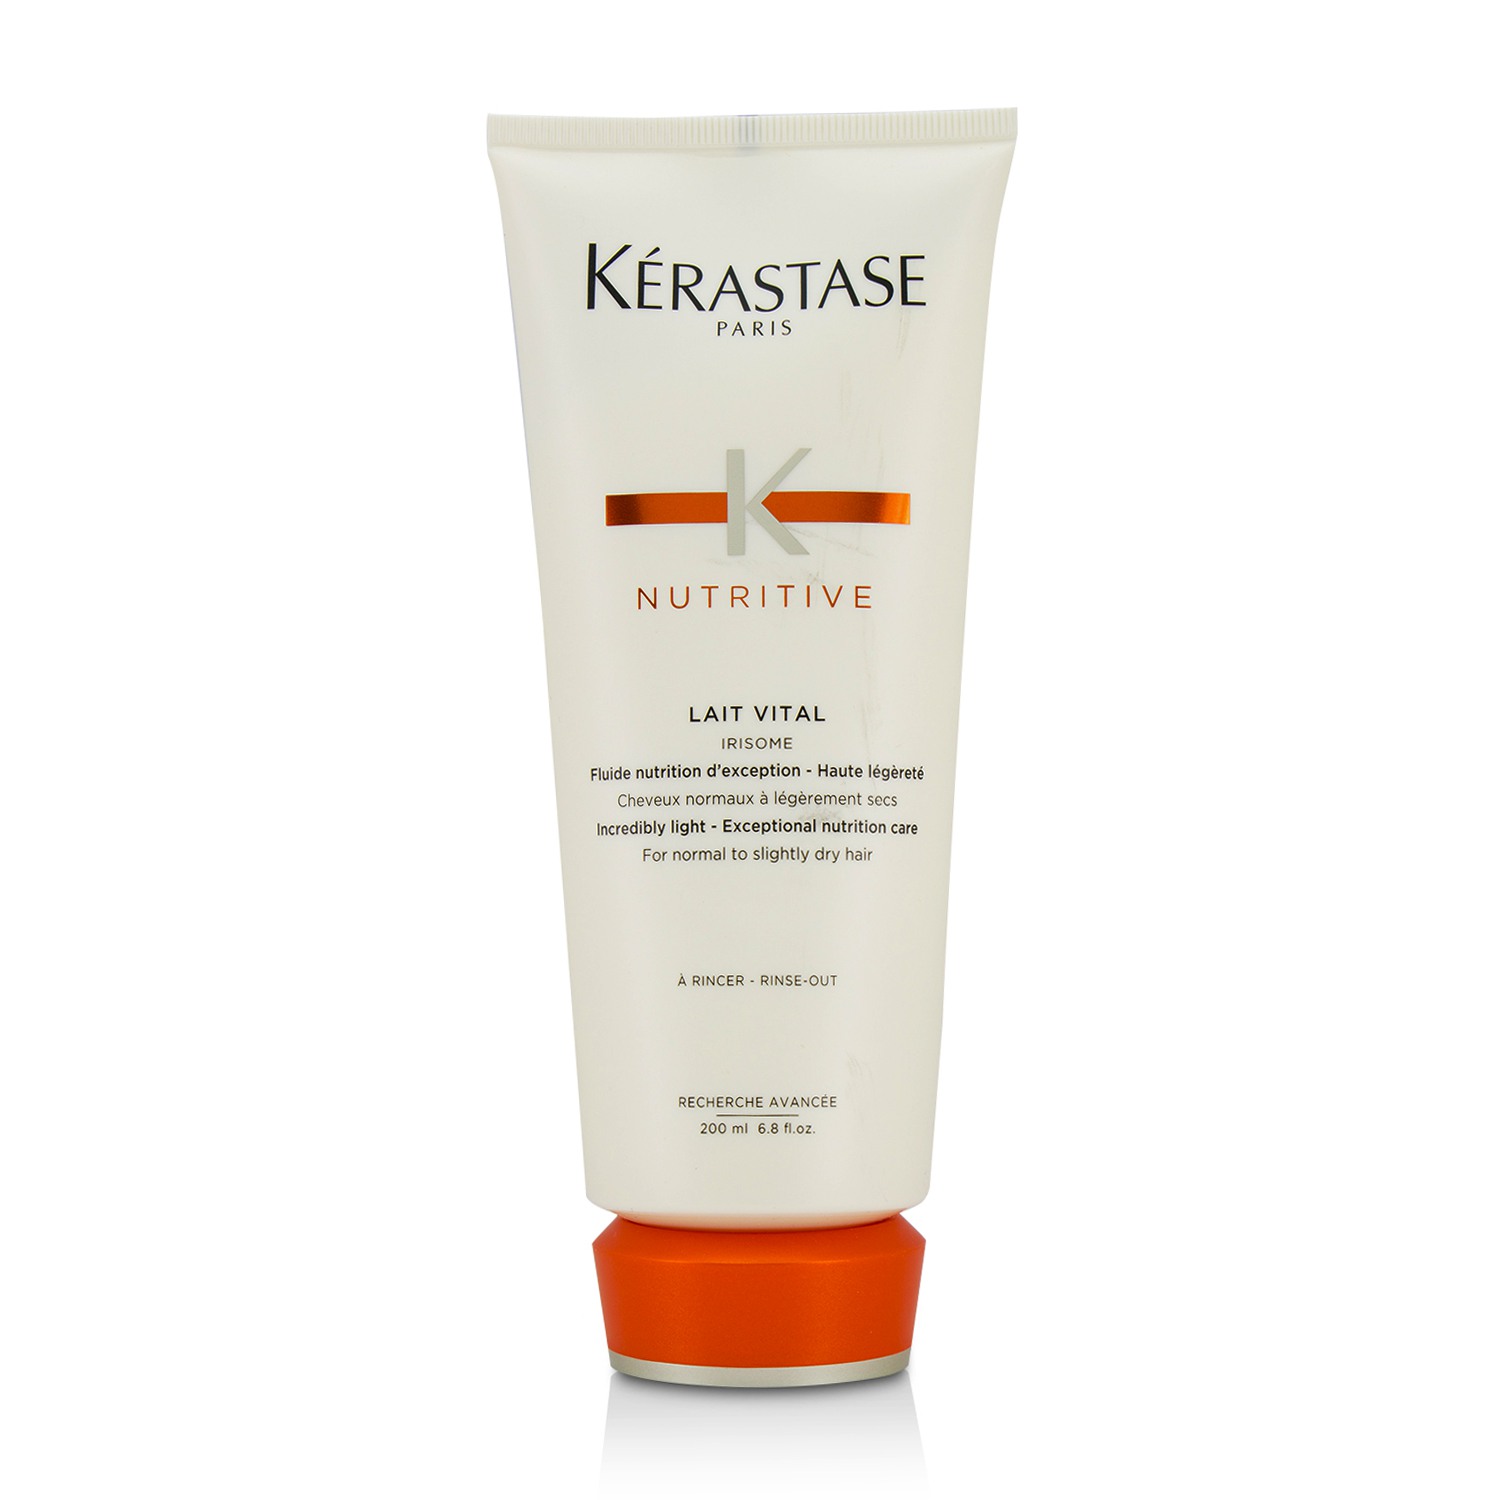 Nutritive Lait Vital Incredibly Light - Exceptional Nutrition Care (For Normal to Slightly Dry Hair) Kerastase Image